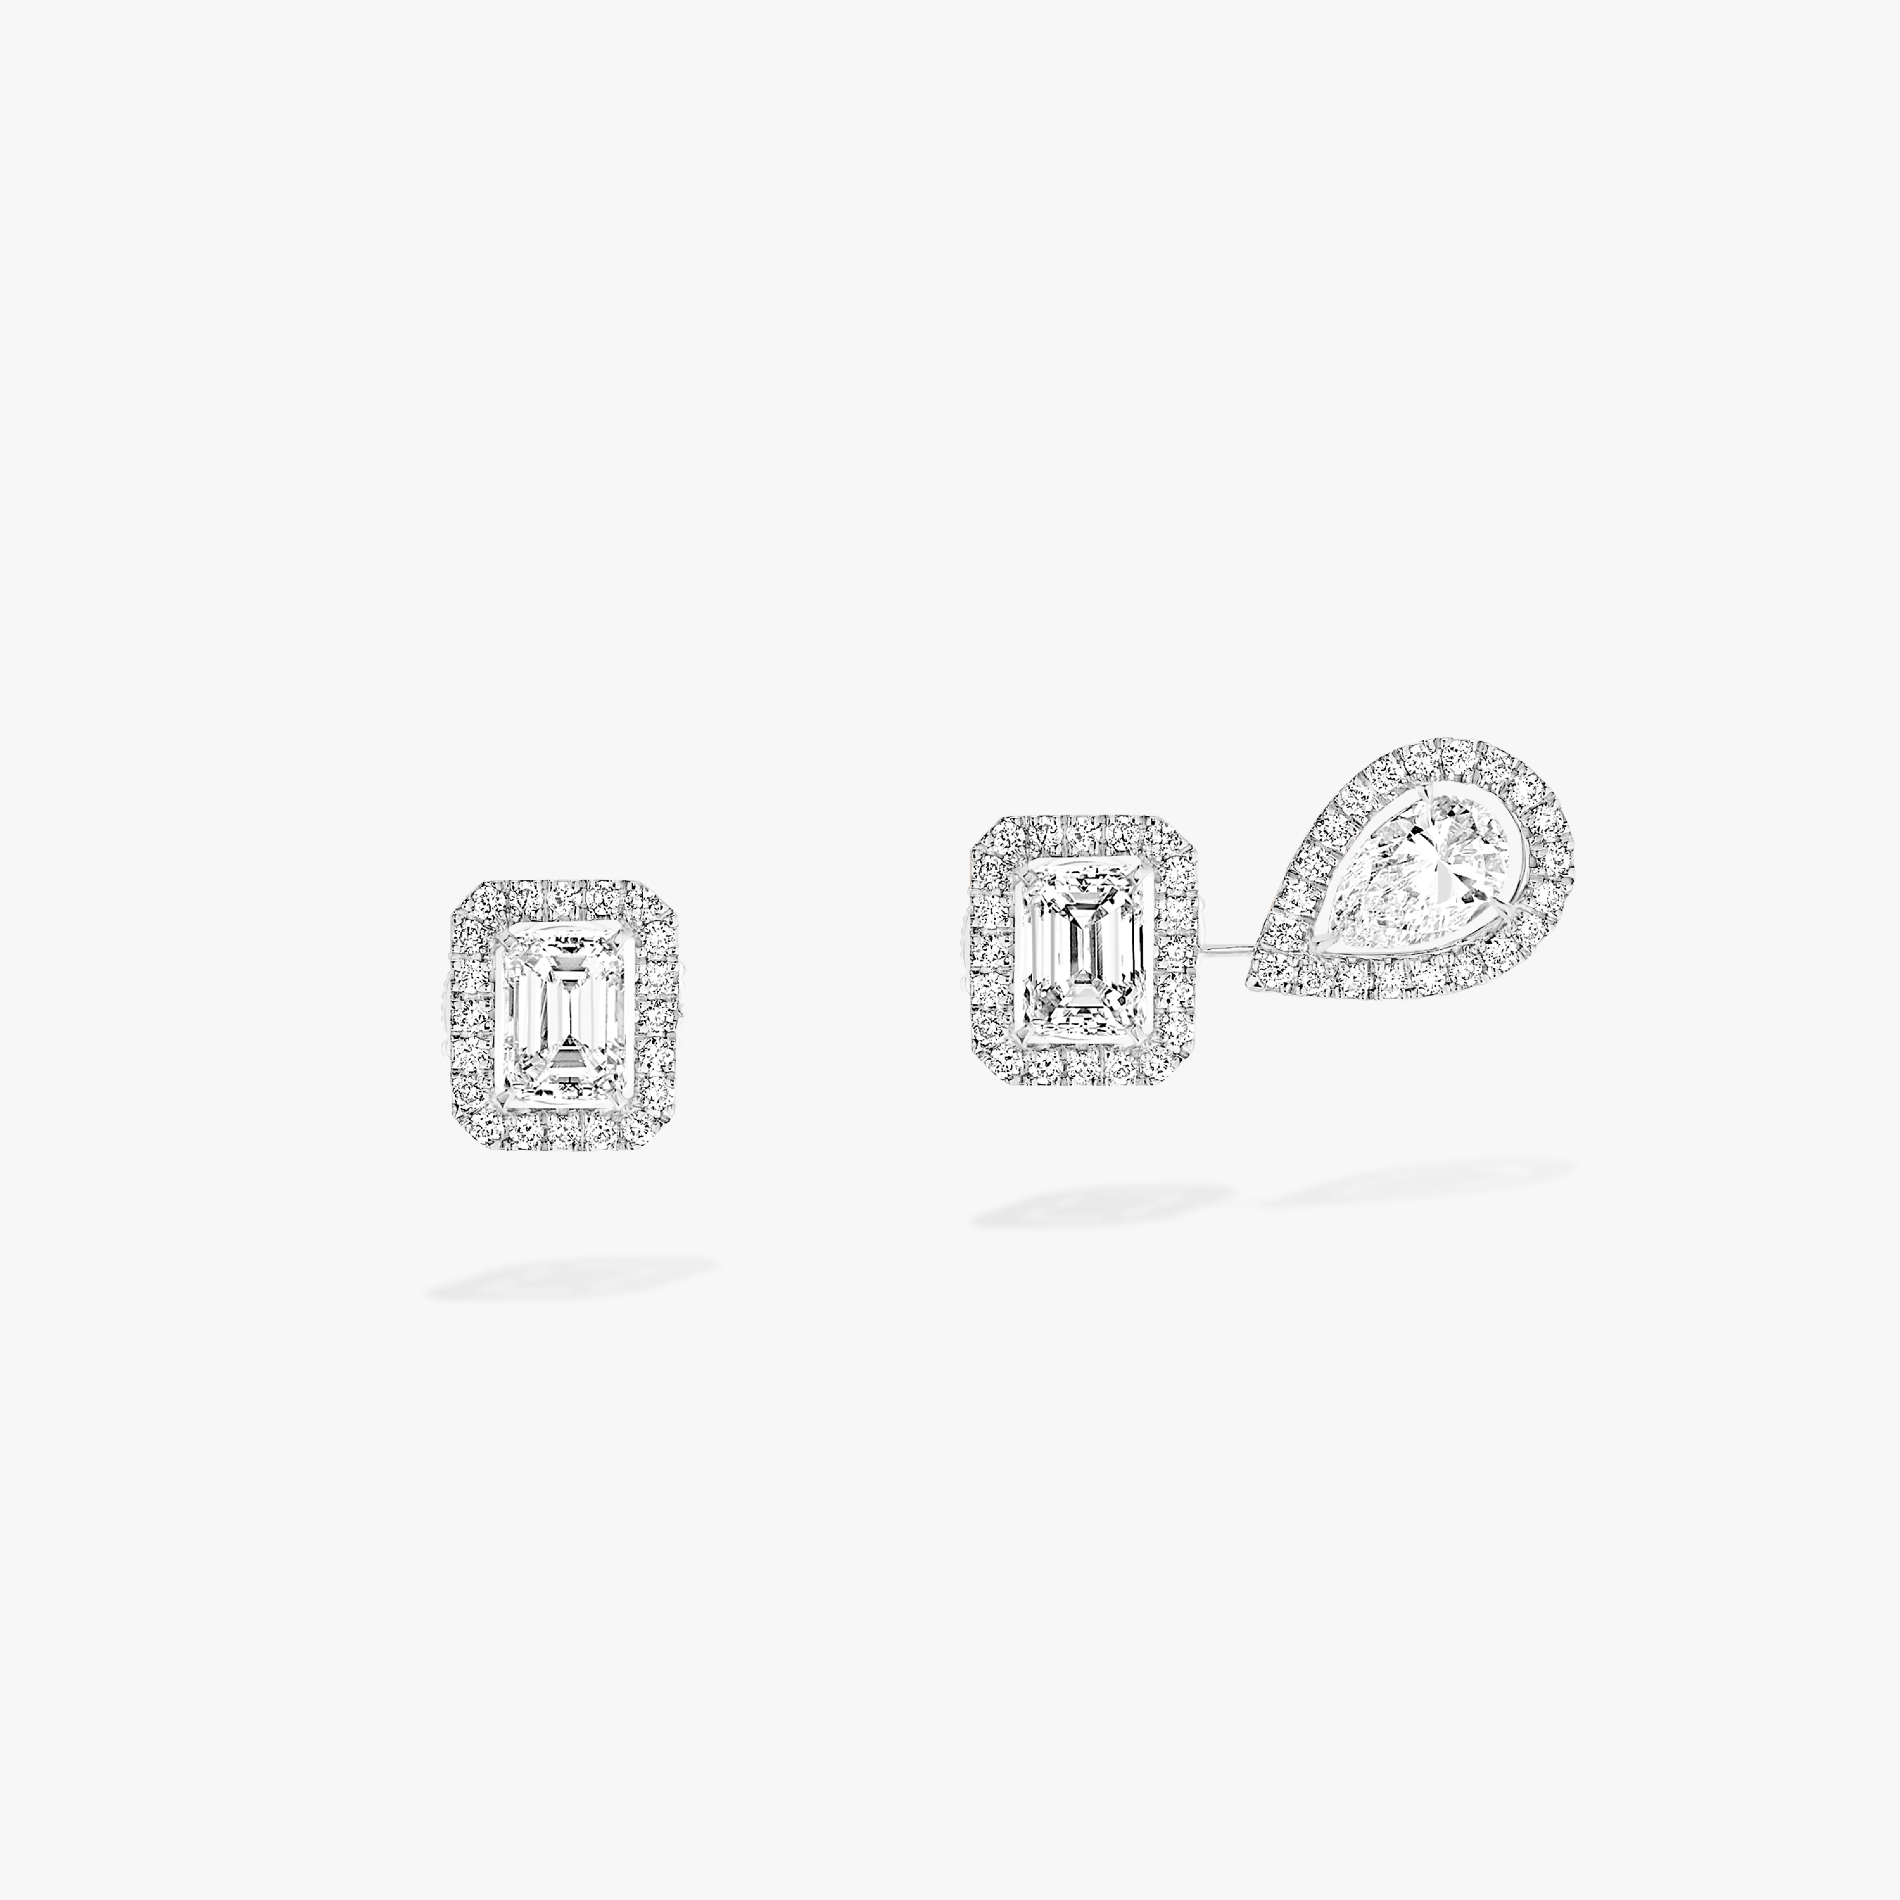 Earrings For Her White Gold Diamond My Twin 1+2 0.20 ct x3 12886-WG